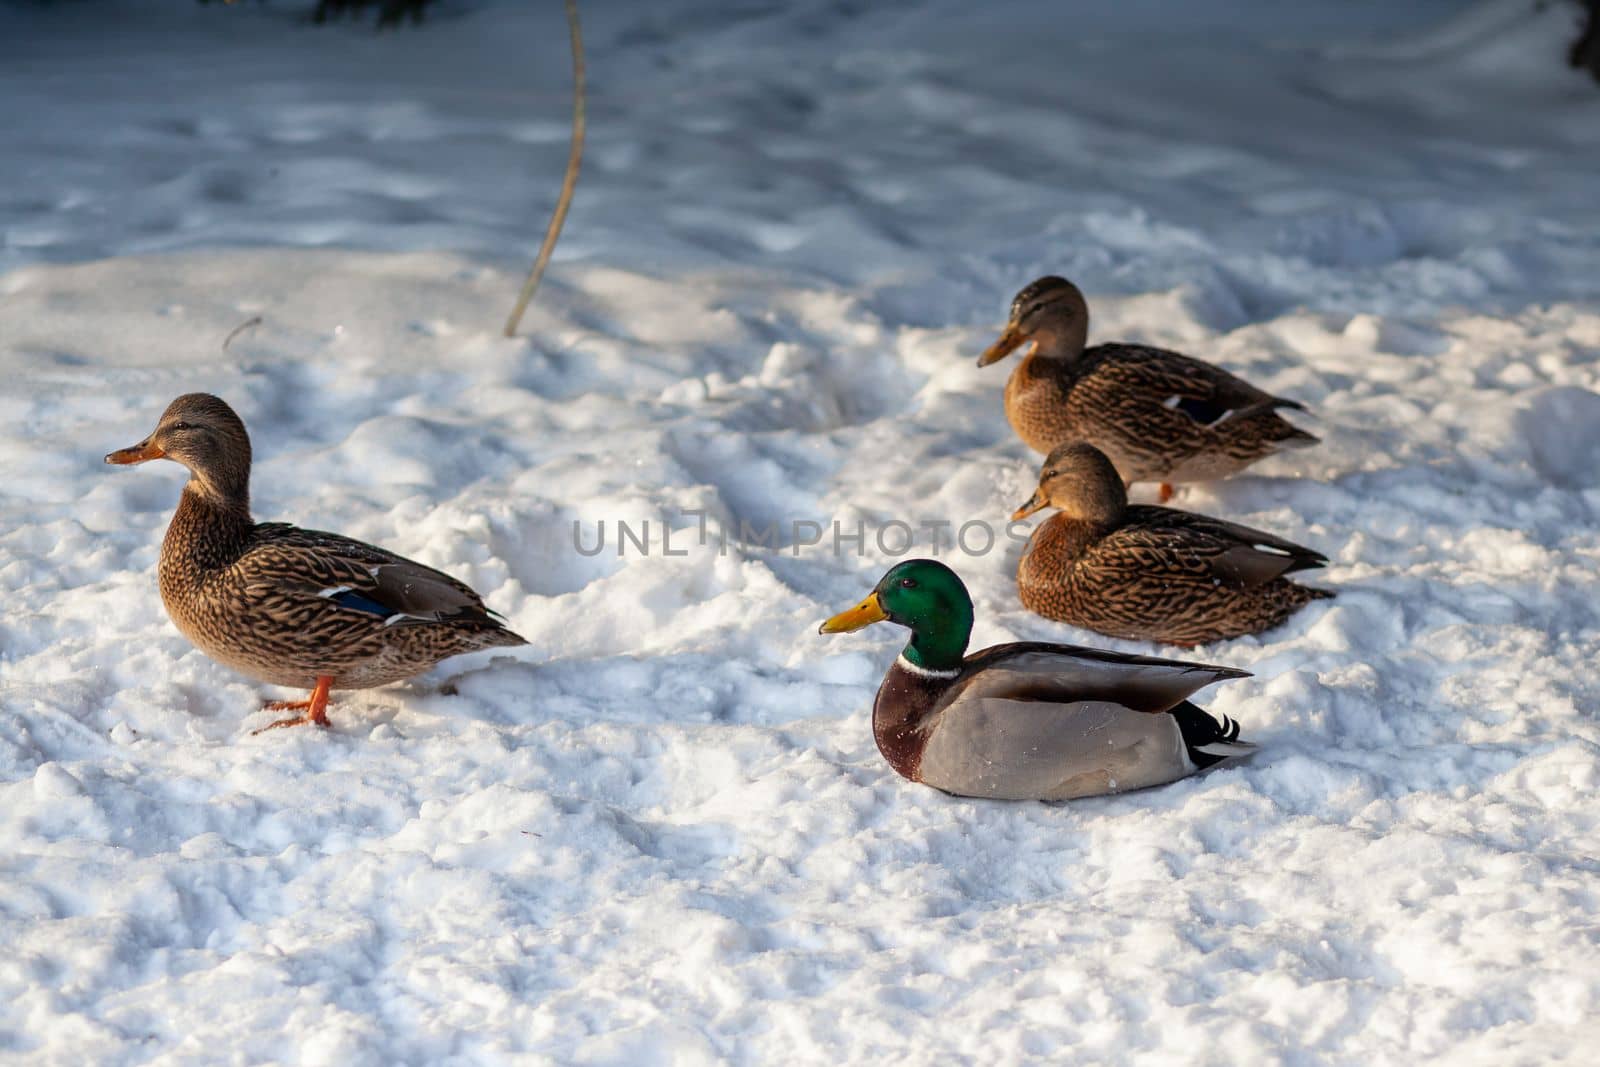 Winter portrait of a duck in a winter public park sitting in the snow by AnatoliiFoto